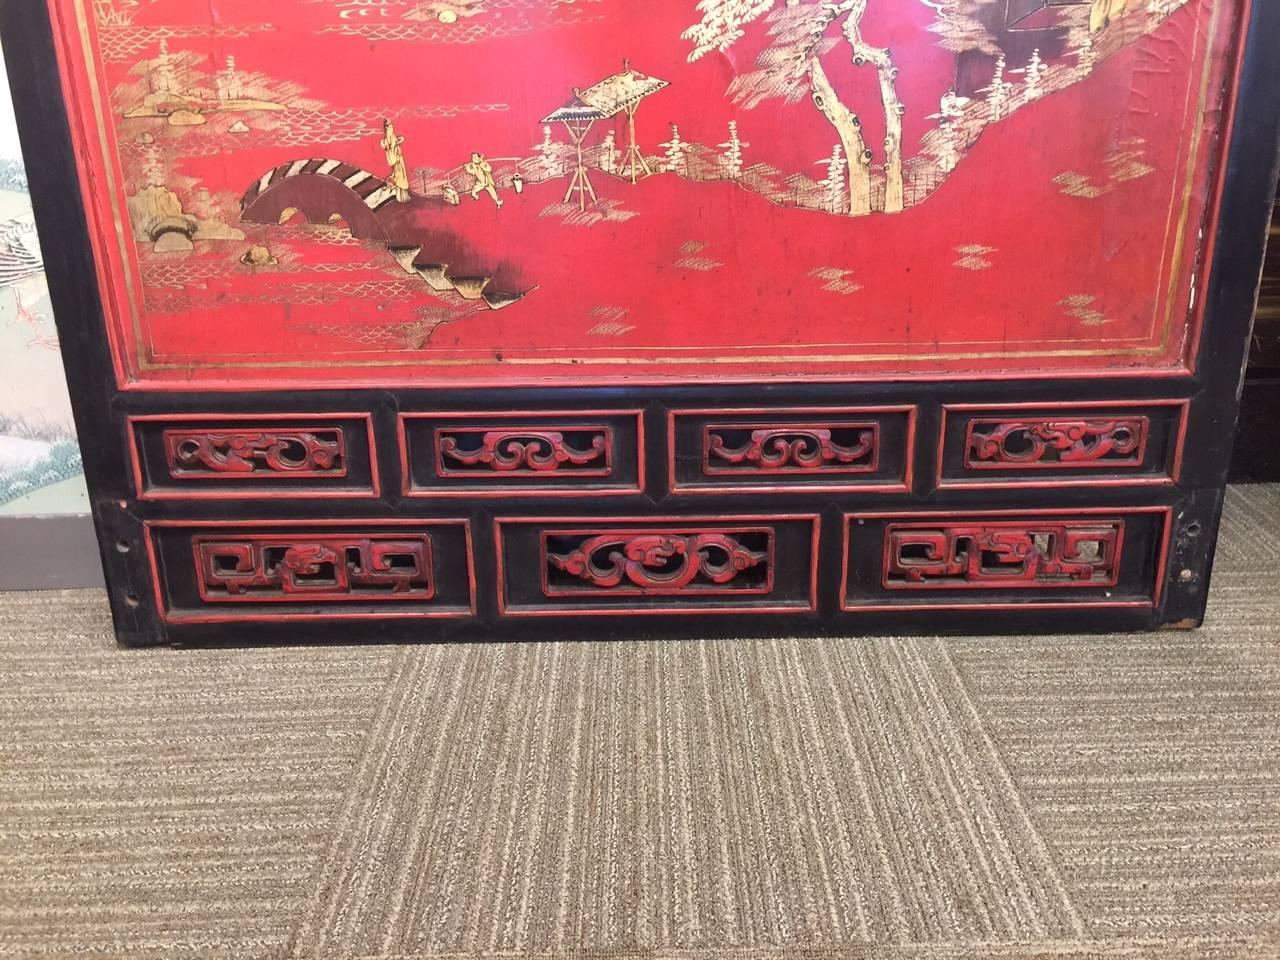 A beautiful, large scale Chinese panel, hand painted in gilt and darker tones on a red lacquer background, and framed with an open work border at the top and base.

Design is of figures and pavilions among water and mountains. There is openwork